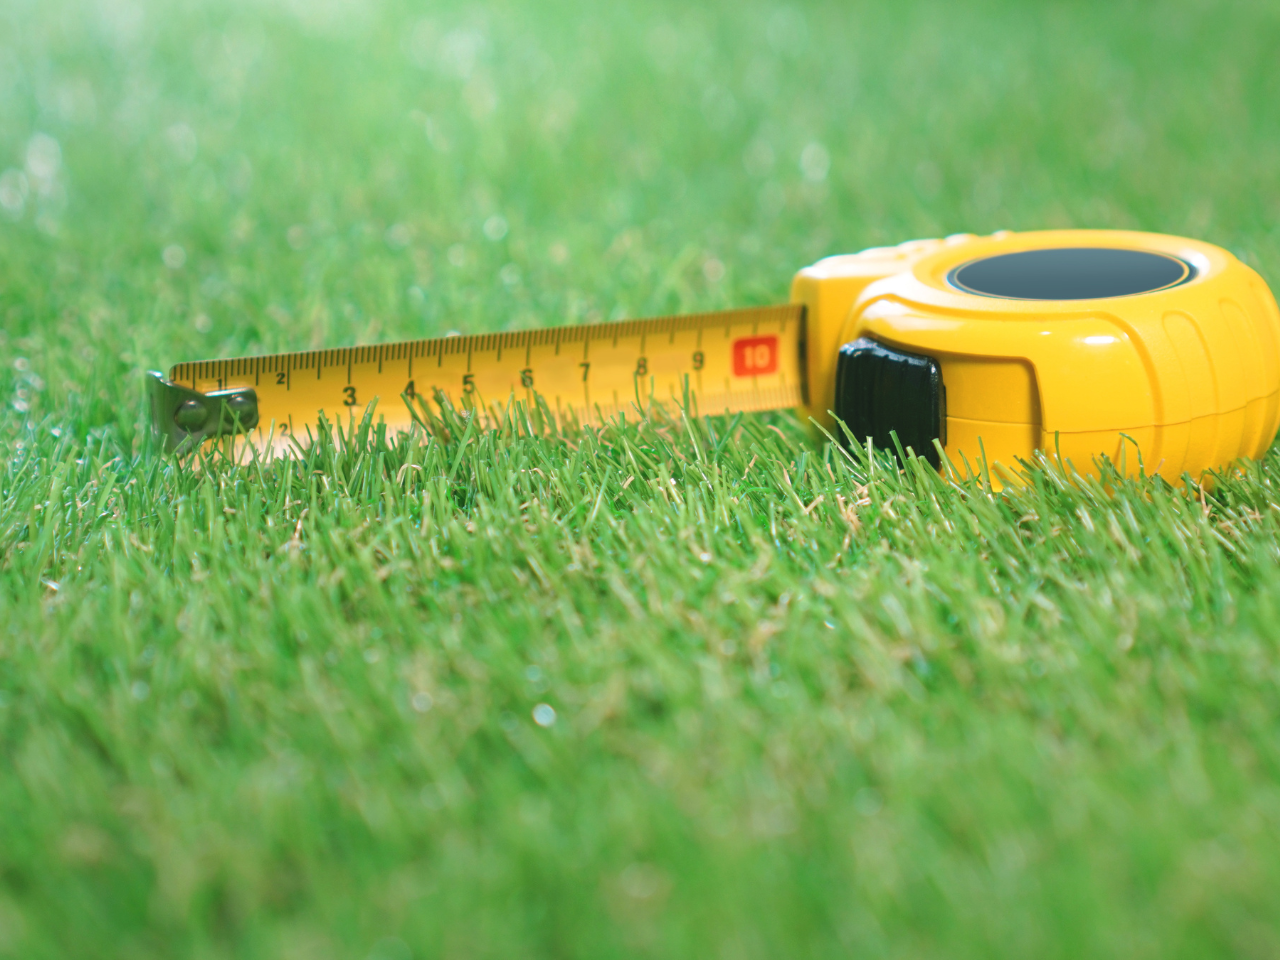 Measuring lawn for buying sod is important